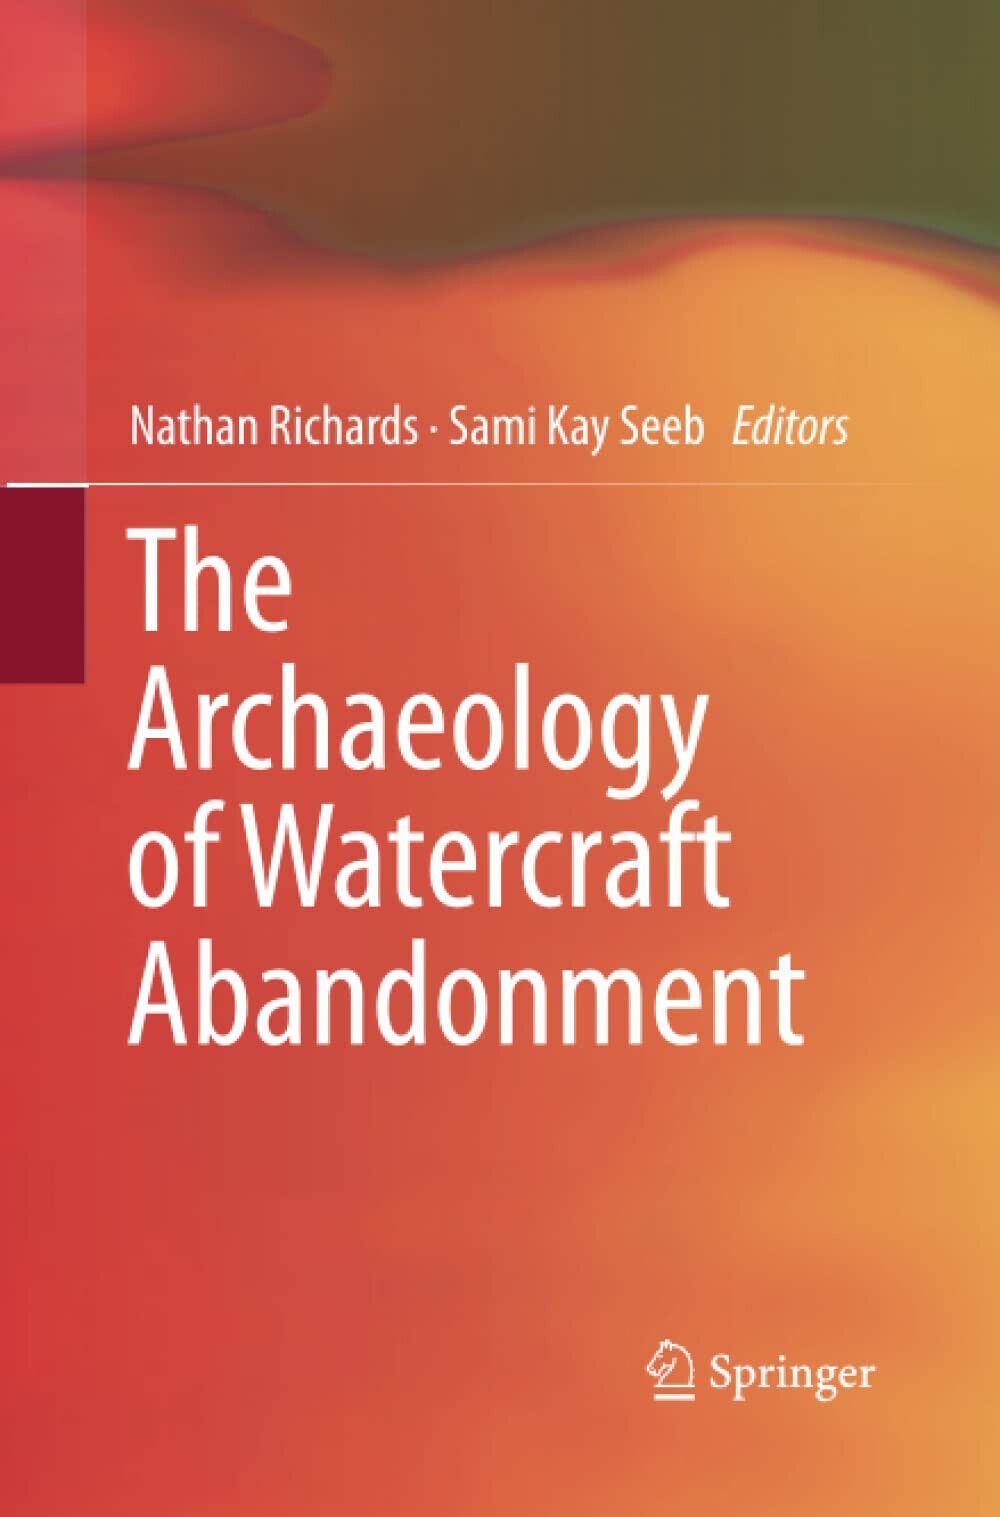 The Archaeology of Watercraft Abandonment - Nathan Richards - Springer, 2015